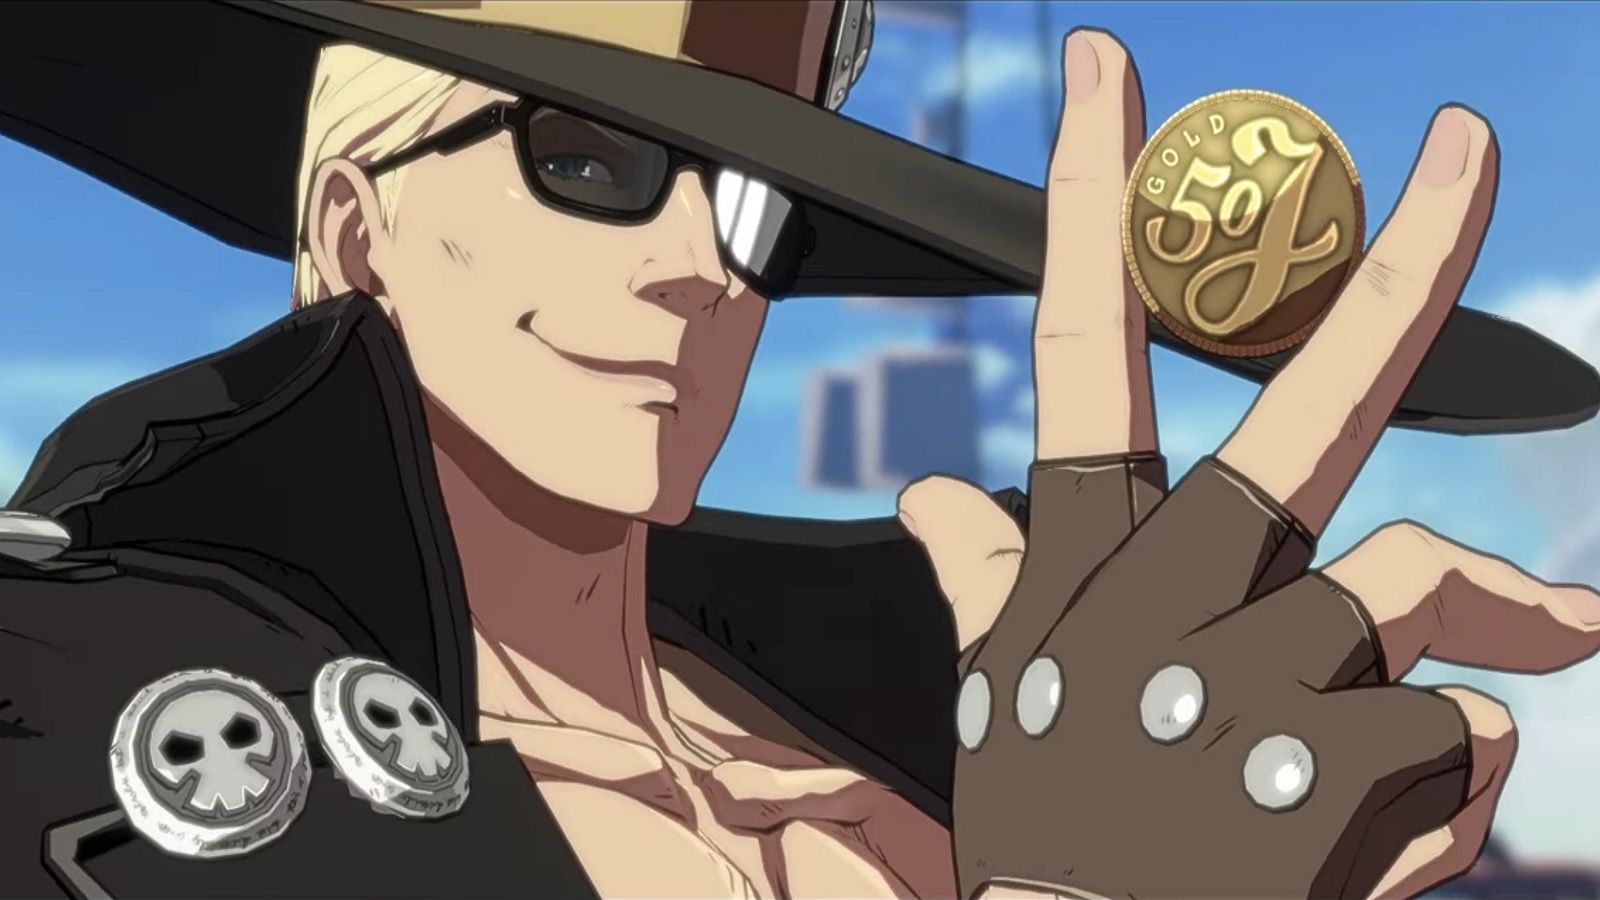 Johnny holding a coin between his fingers in Guilty Gear Strive